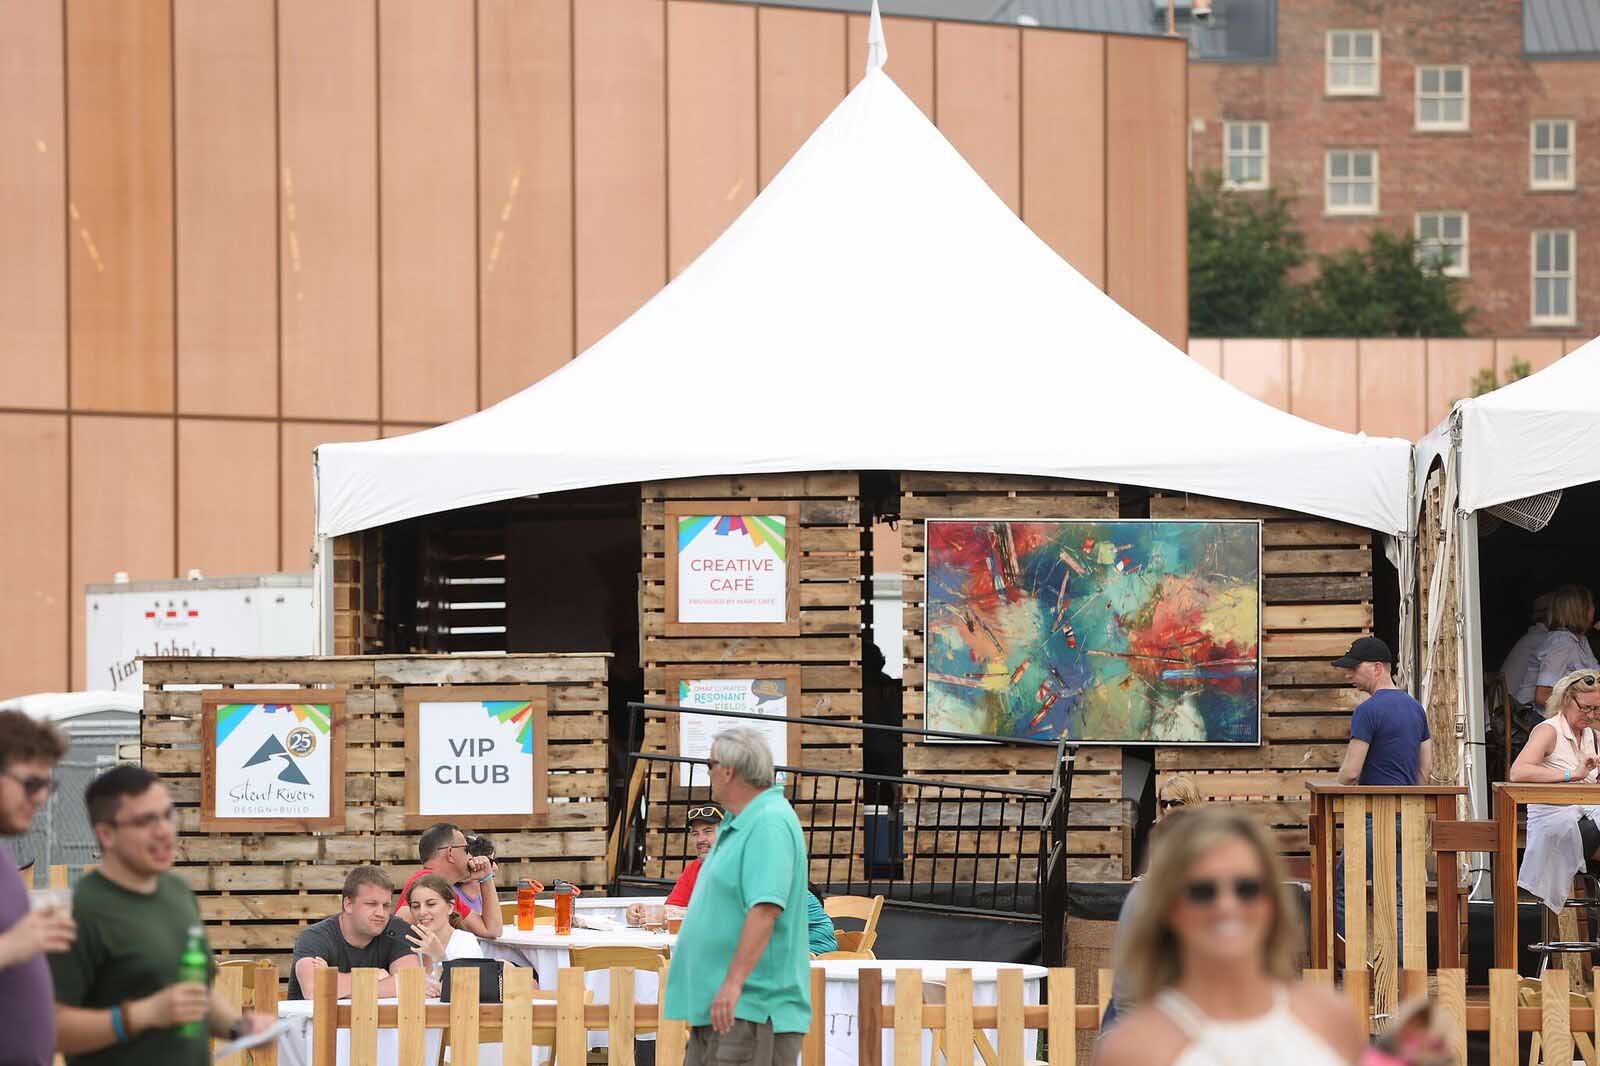 Creative Cafe for Silent Rivers VIP Club at 2018 Des Moines Arts Festival with sustainable materials and garden